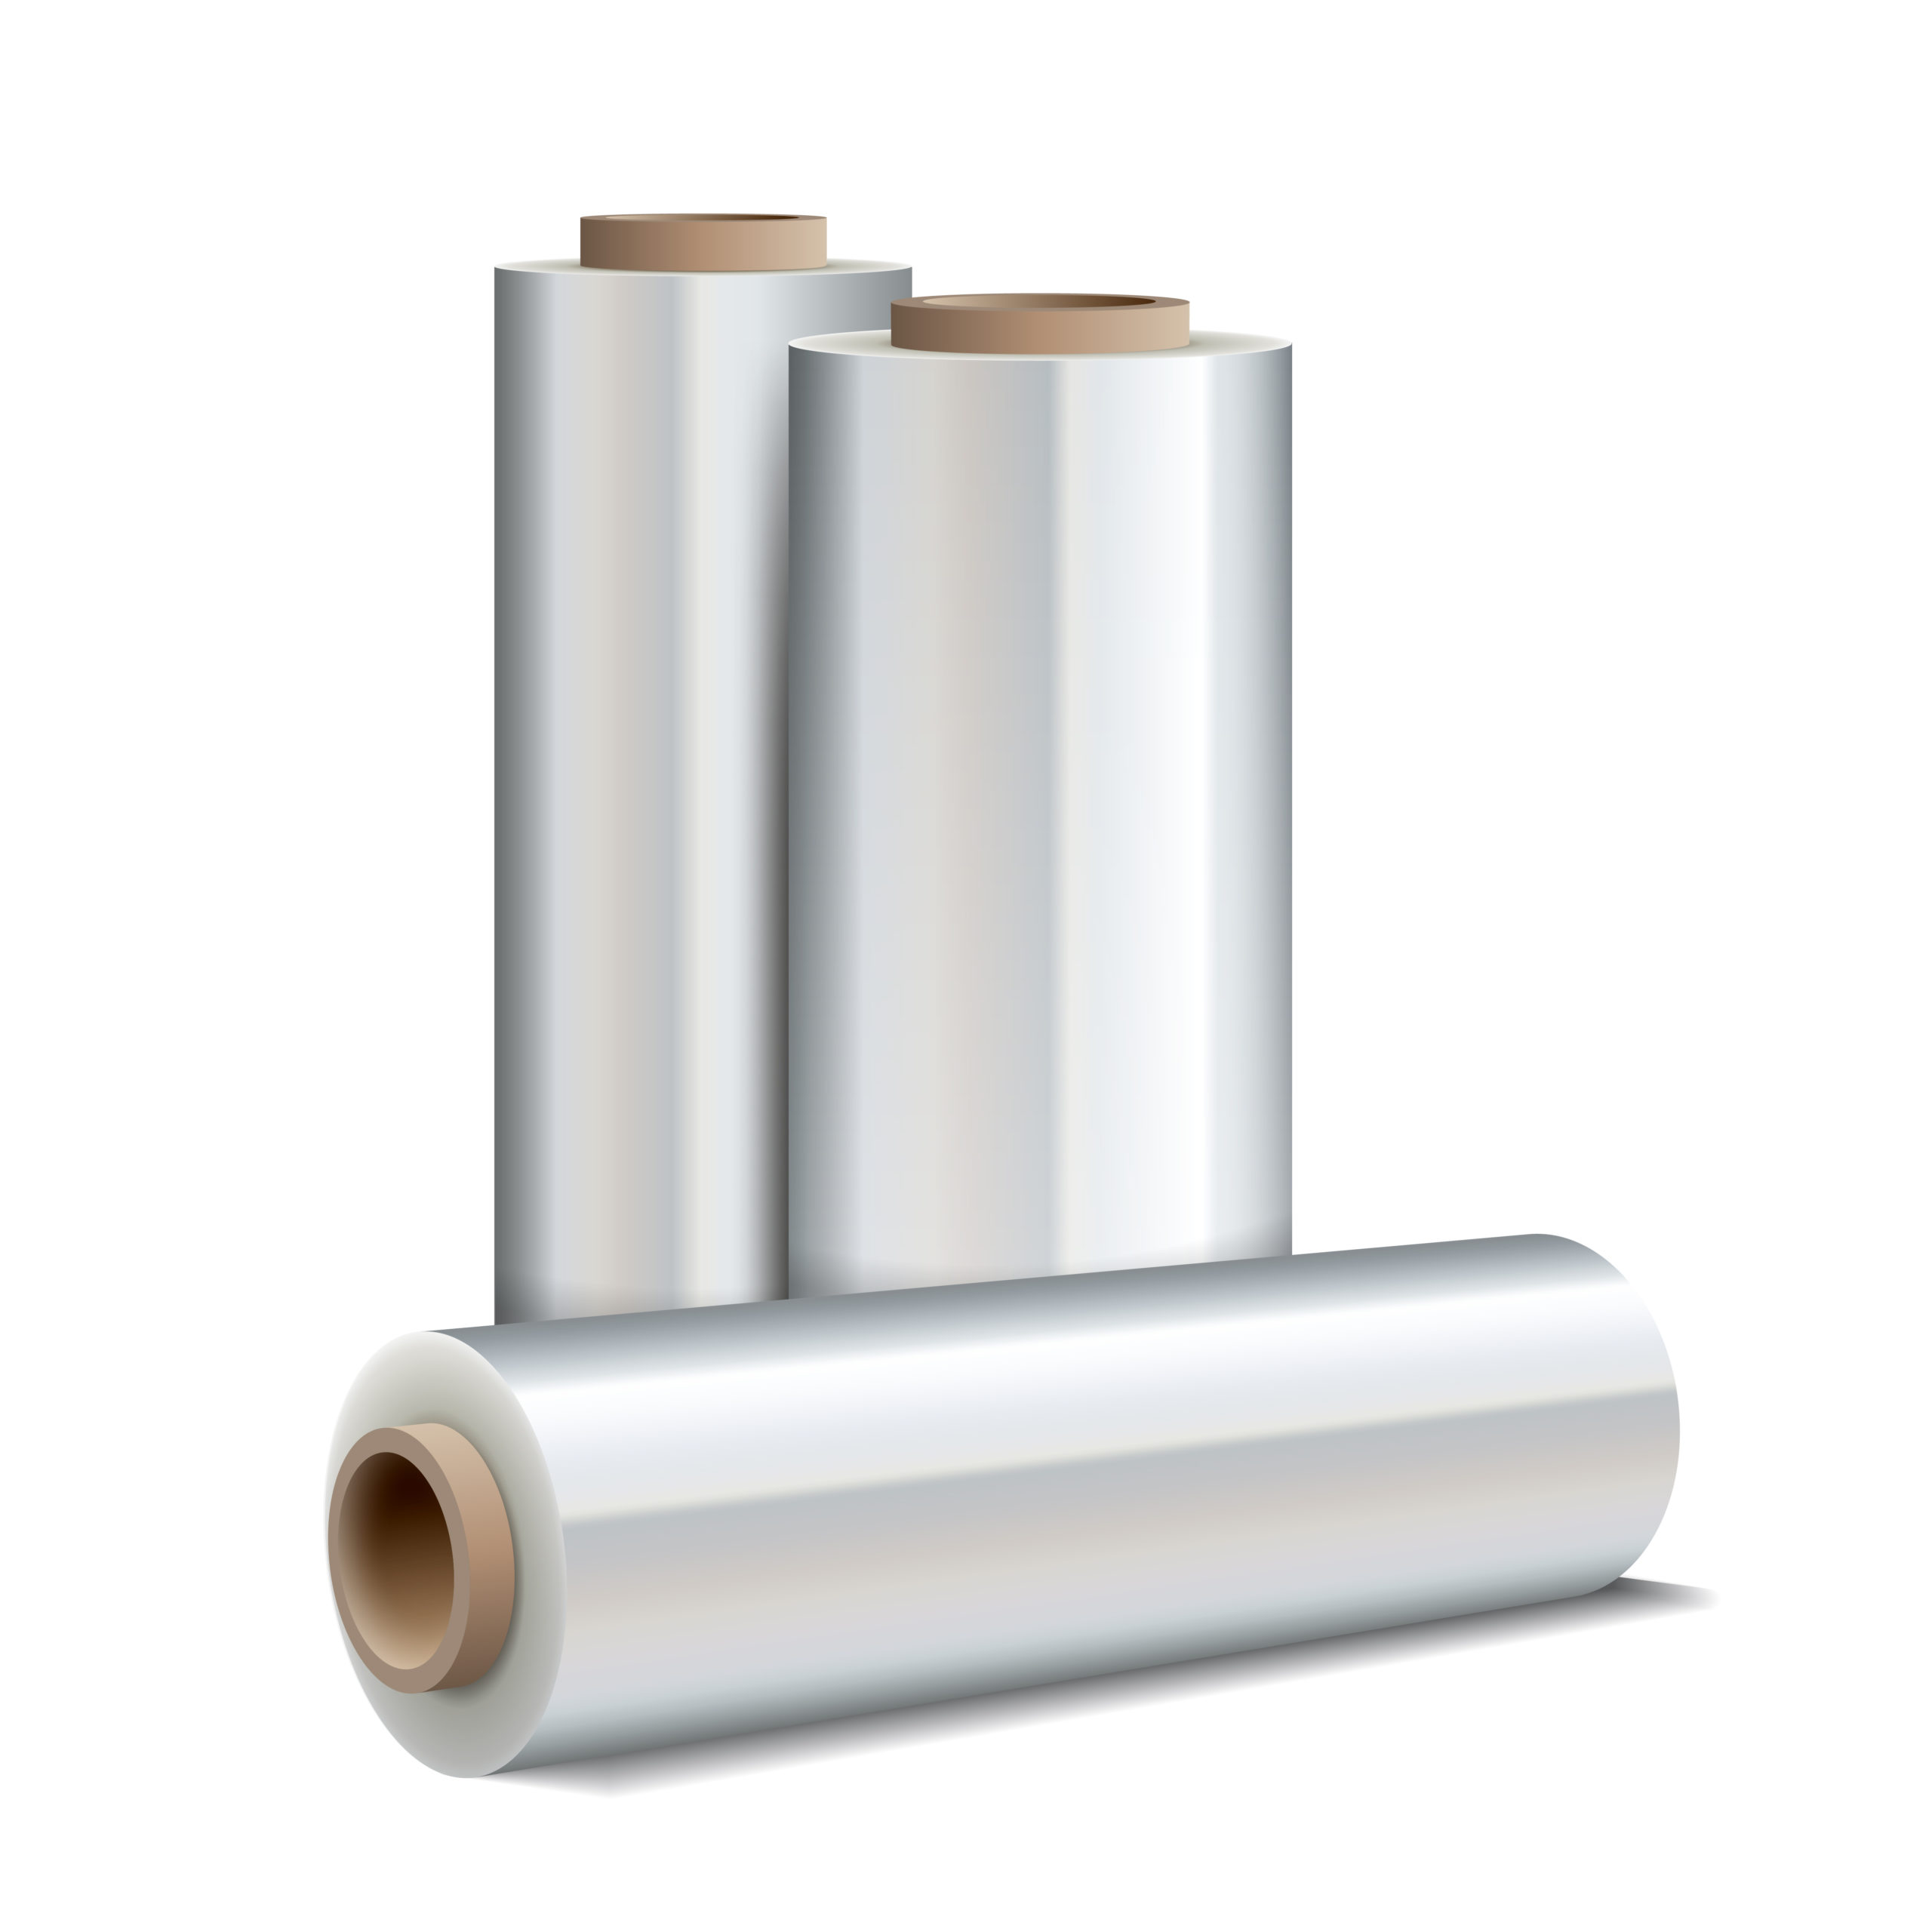 Banner Material and Media (Rolls) - Polymershapes